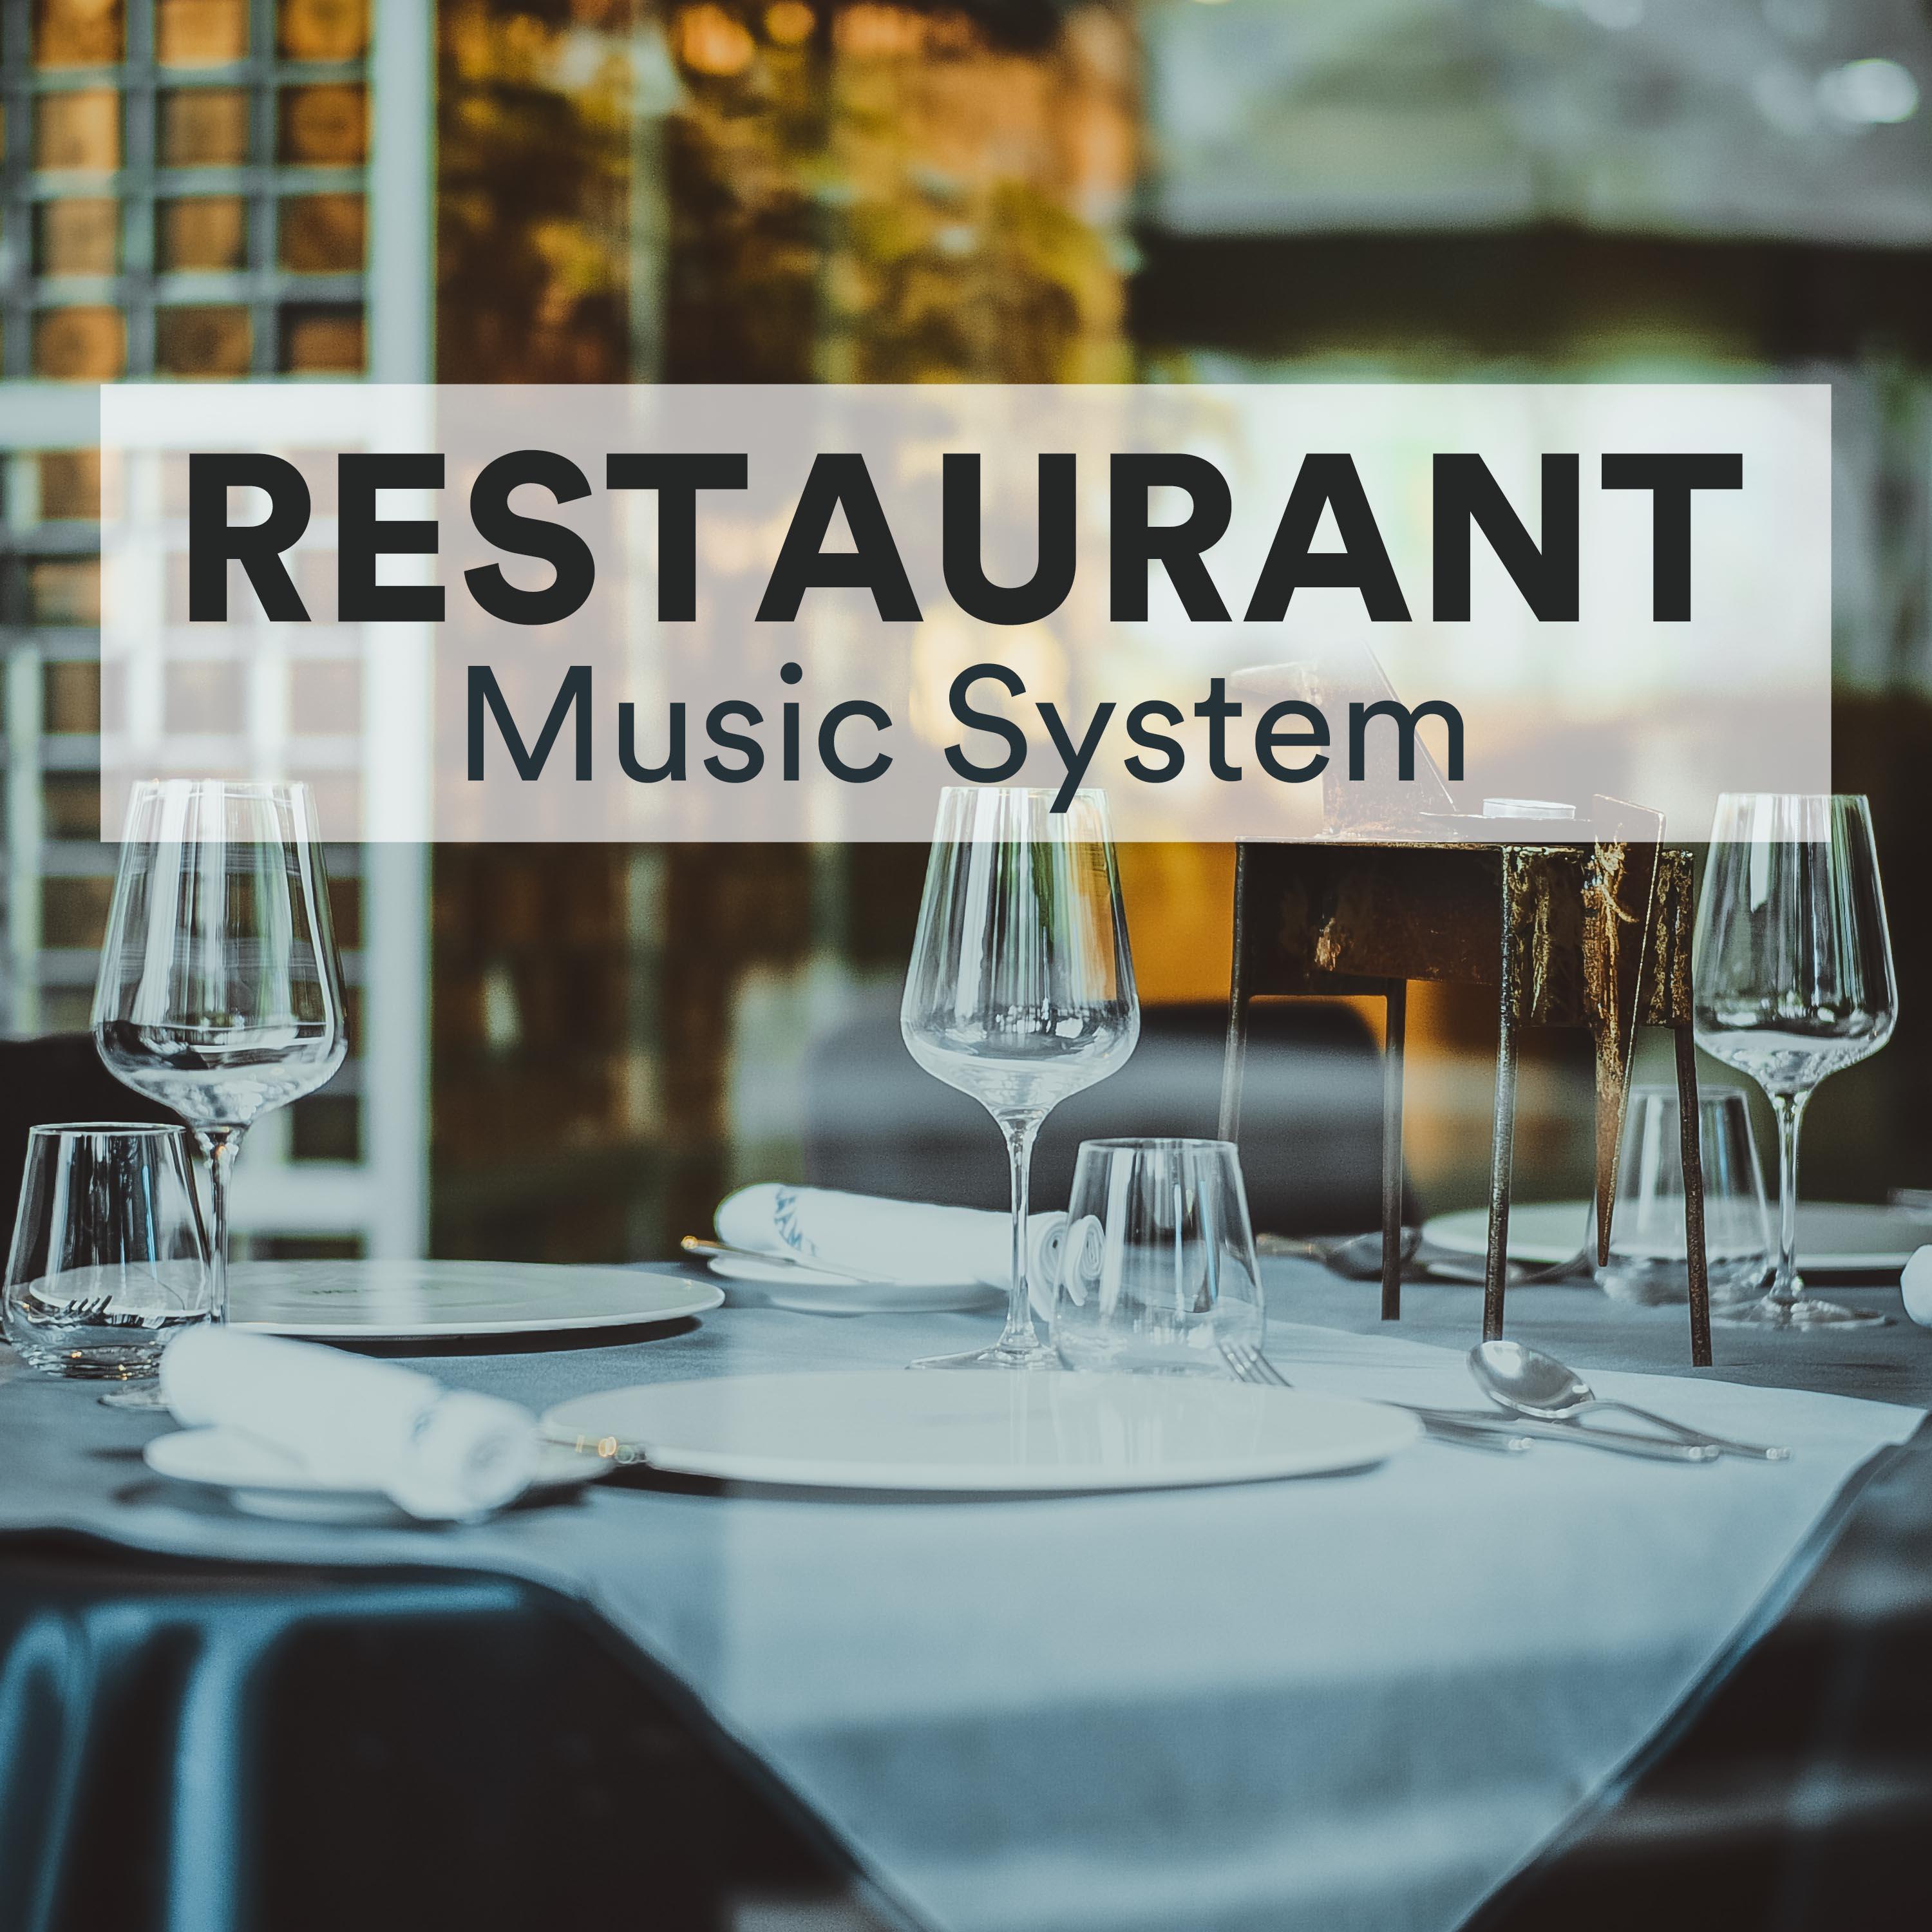 Restaurant Music System - Lounge Music Collection, Top Hits 2018